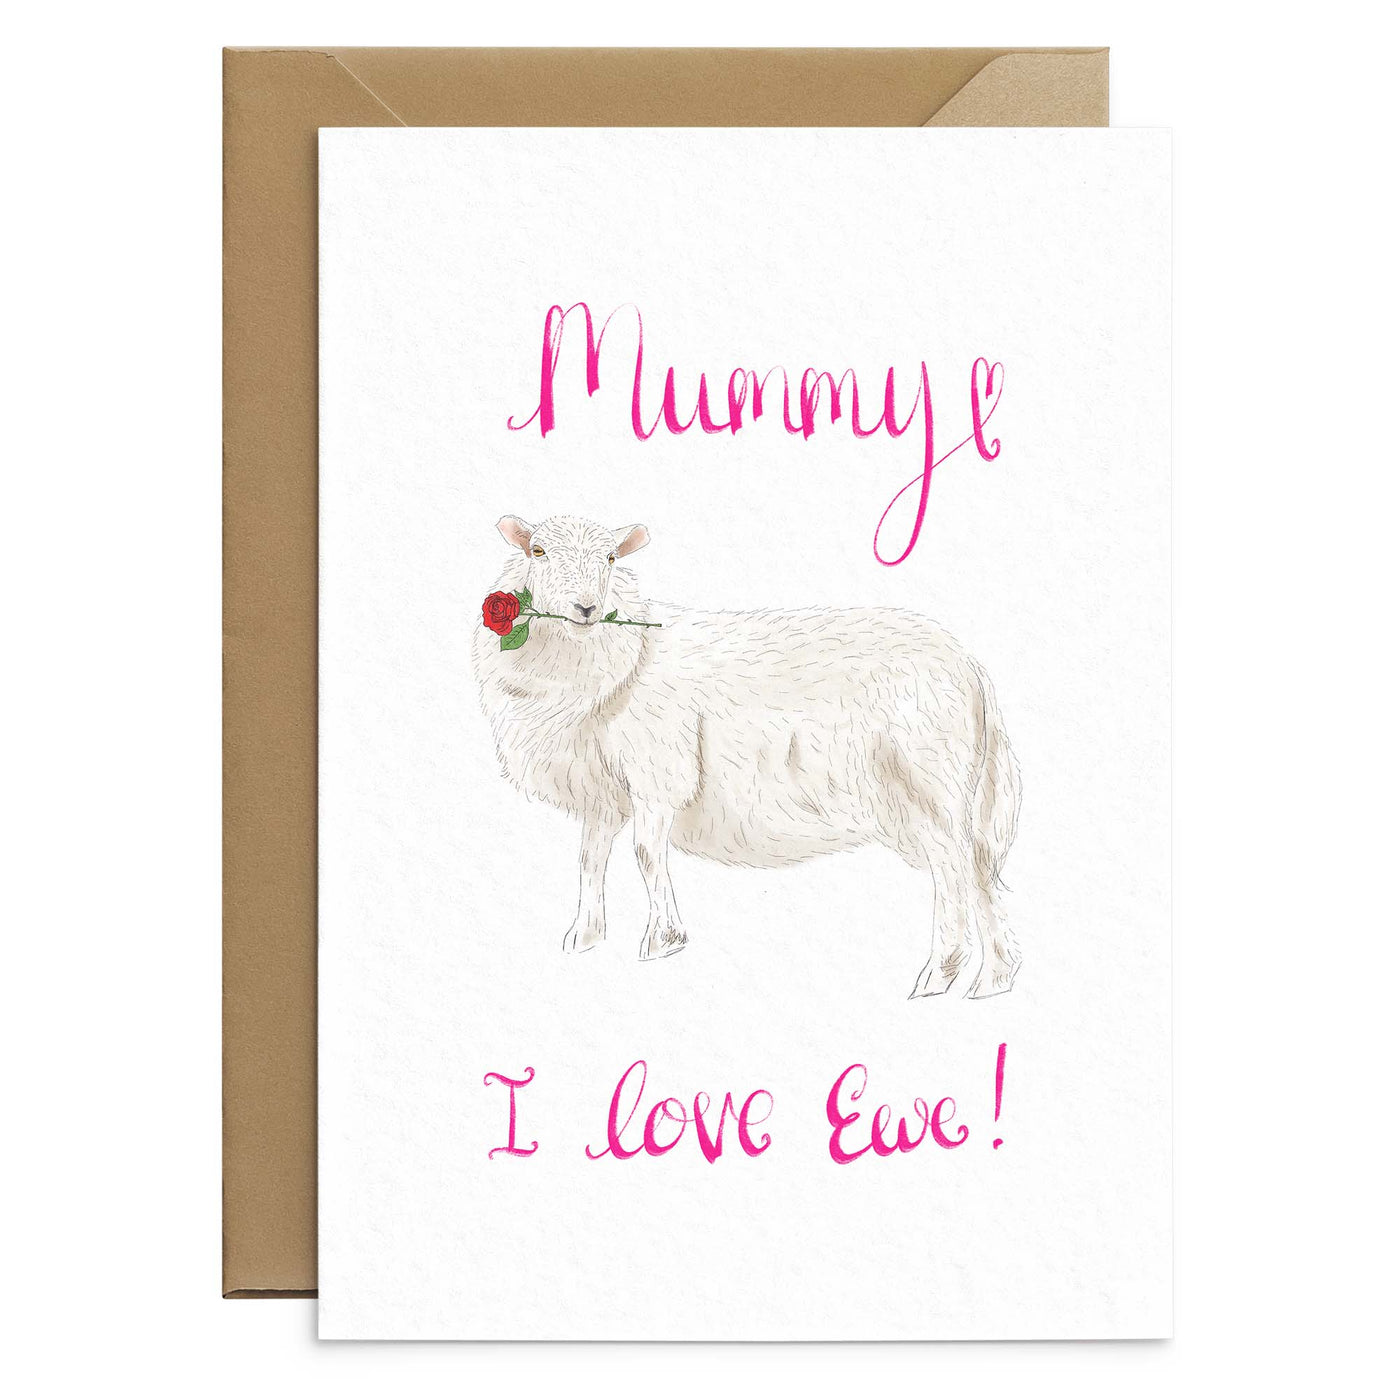 A cute mothers day card with a sheep illustration. The sheep is holding a red rose in its mouth by the stem. Pink handwriting above and below the illustration read 'Mummy I love Ewe'. There is a brown Kraft envelope behind the card. Greetings Card by Poppins and co.